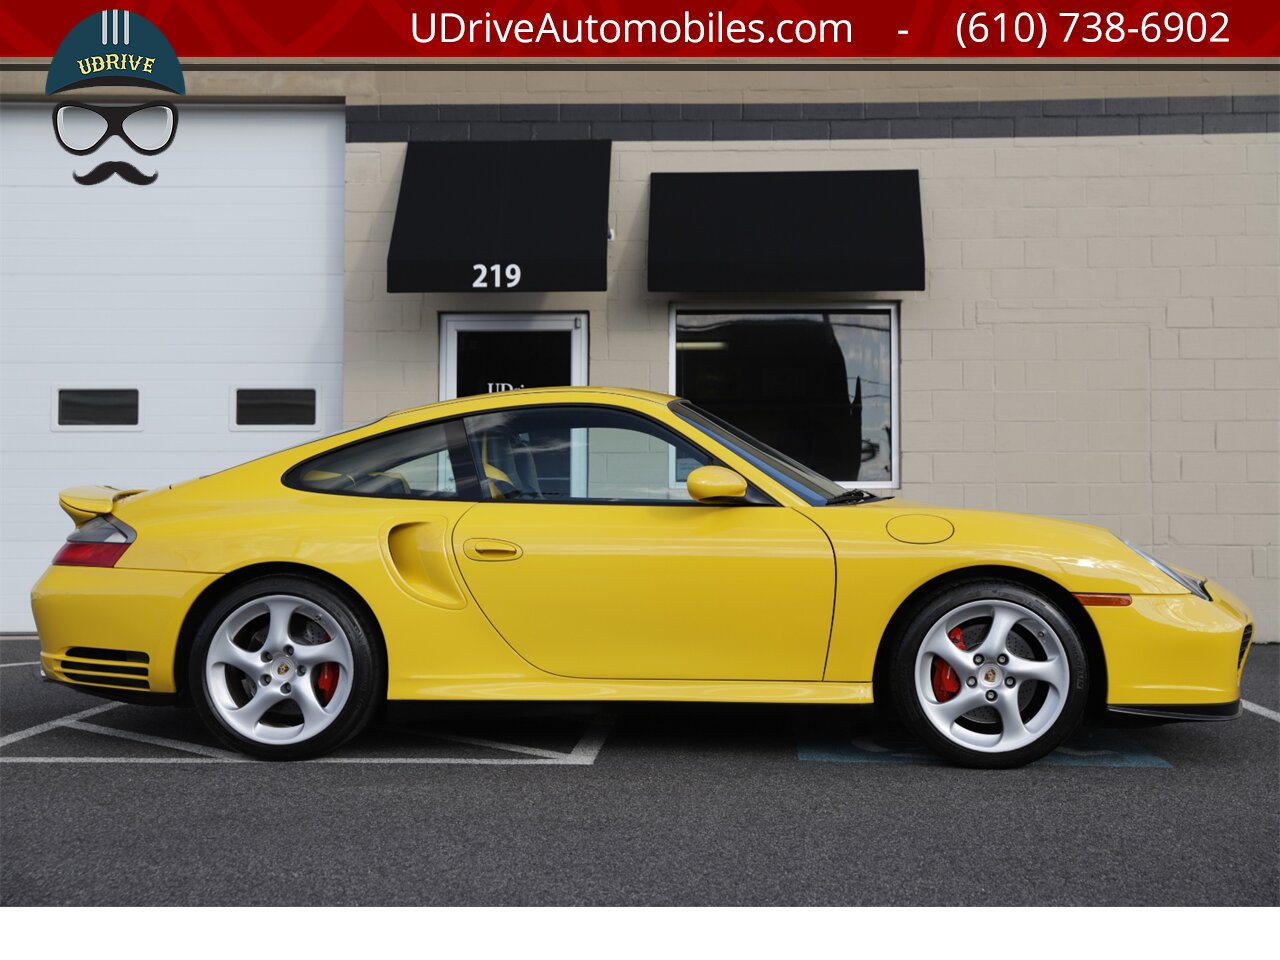 2001 Porsche 911 Turbo 996 6 Sp PTS Ferrari Giallo Modena  FULL Carbon Pkg 1 of a Kind Paint to Sample - Photo 14 - West Chester, PA 19382